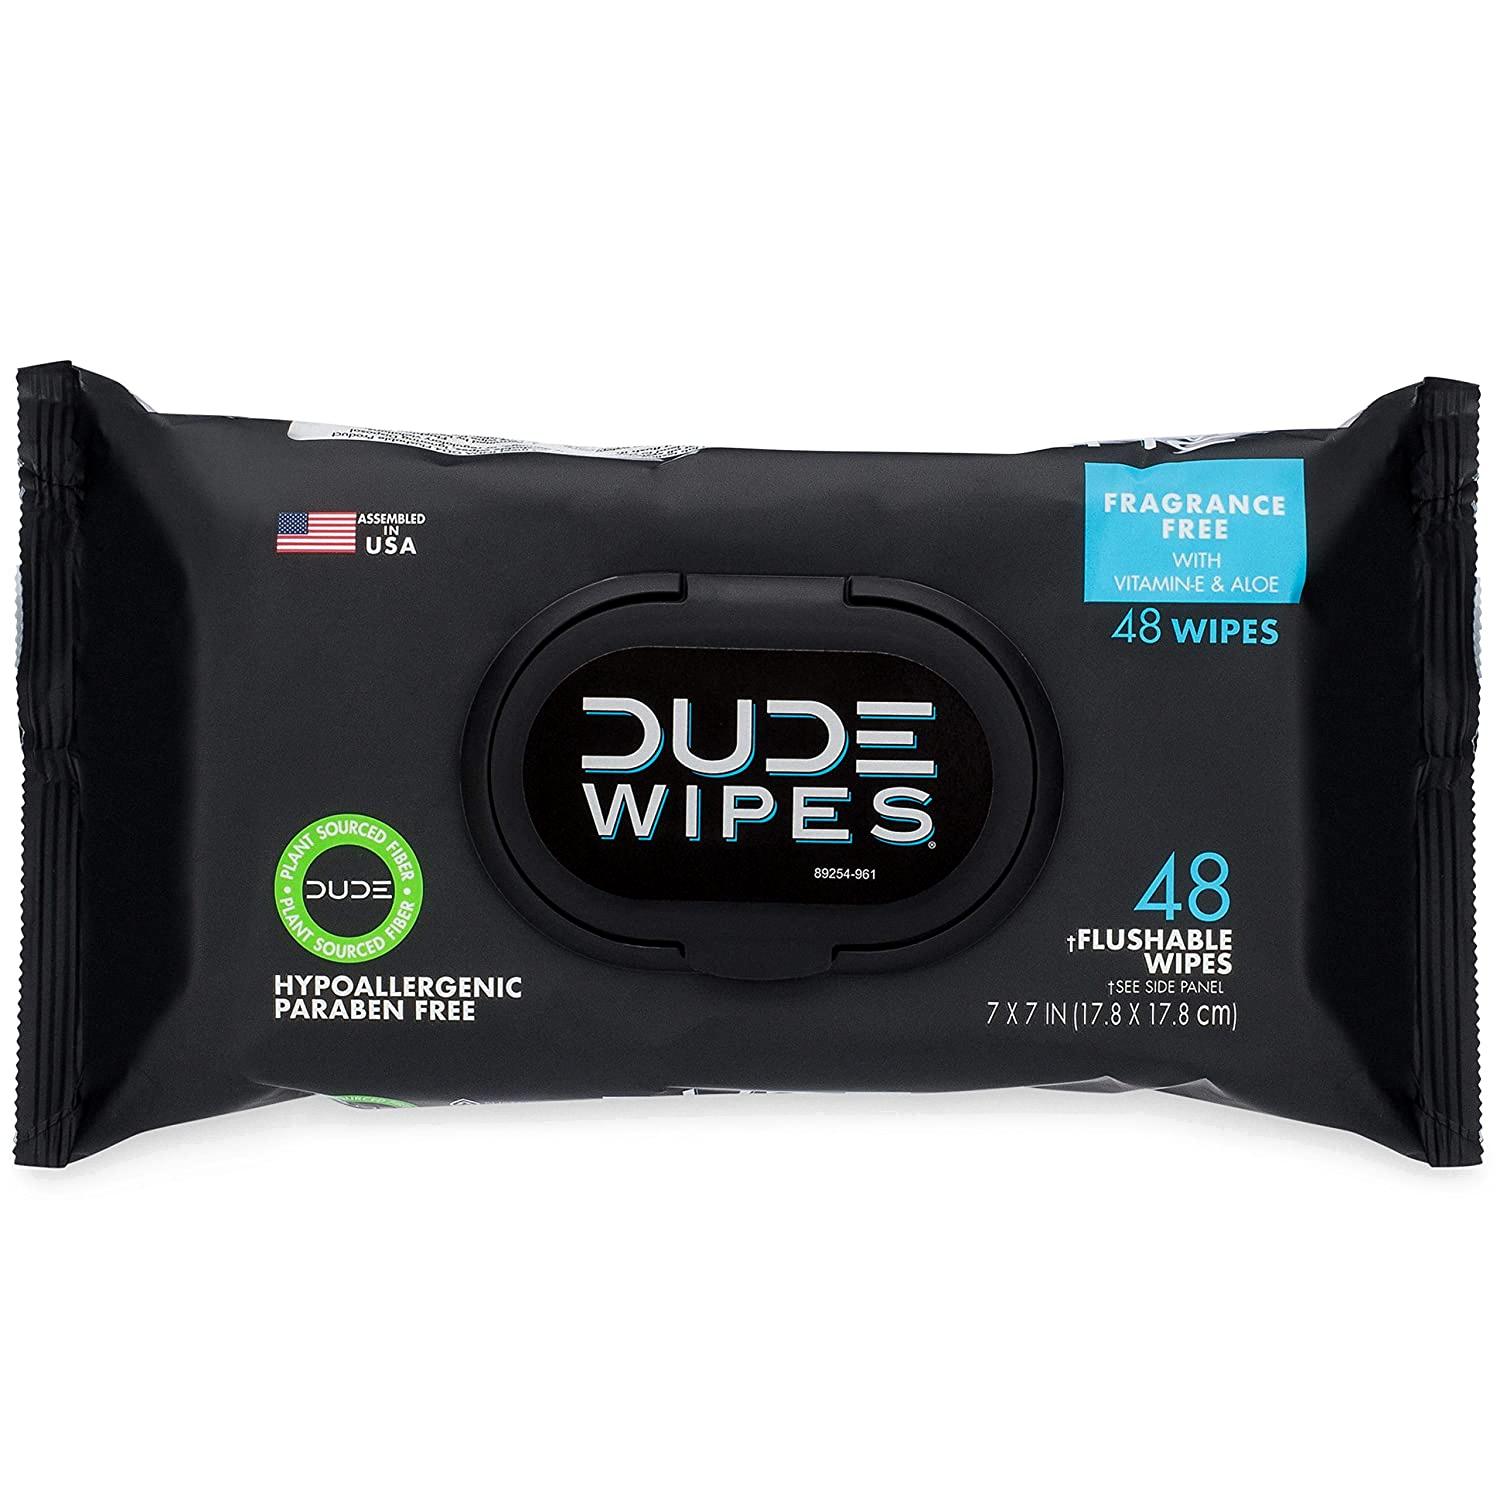 are dude wipes safe for dogs